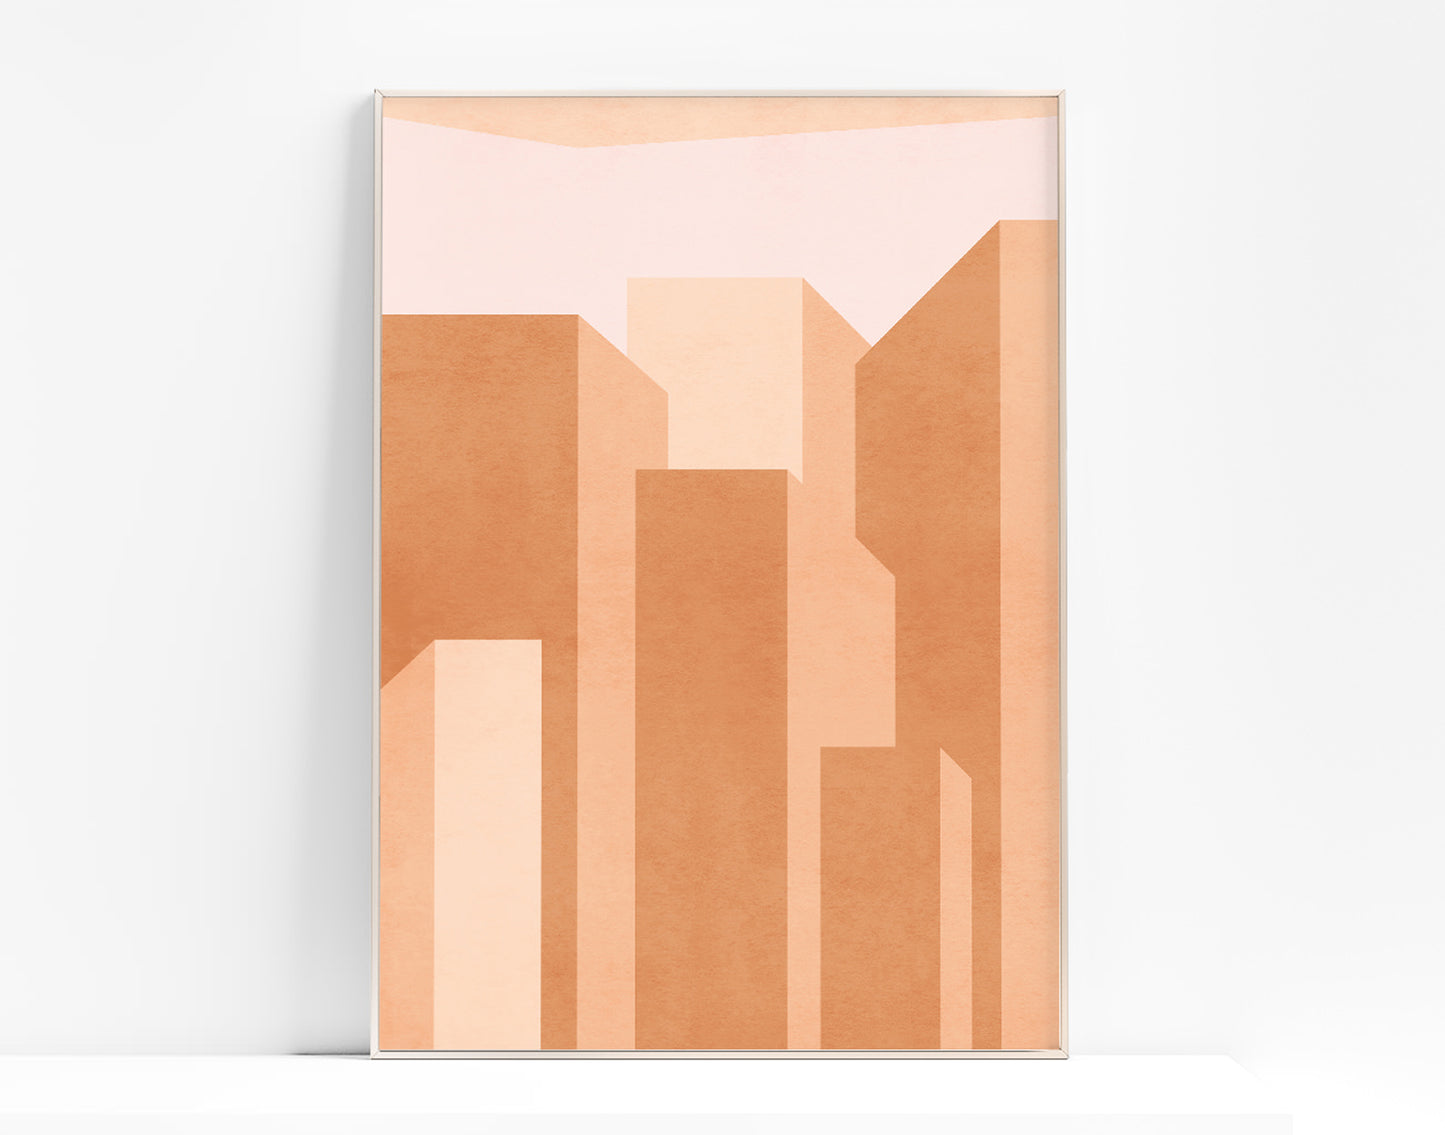 Living room wall art	Neutral boho	Abstract city poster	Neutral geometric	Printable wall art	Terracotta wall art	Abstract cityscape	INSTANT DOWNLOAD	Mid century modern	Minimalist poster	Vintage poster	Housewarming gift	Beige wall art